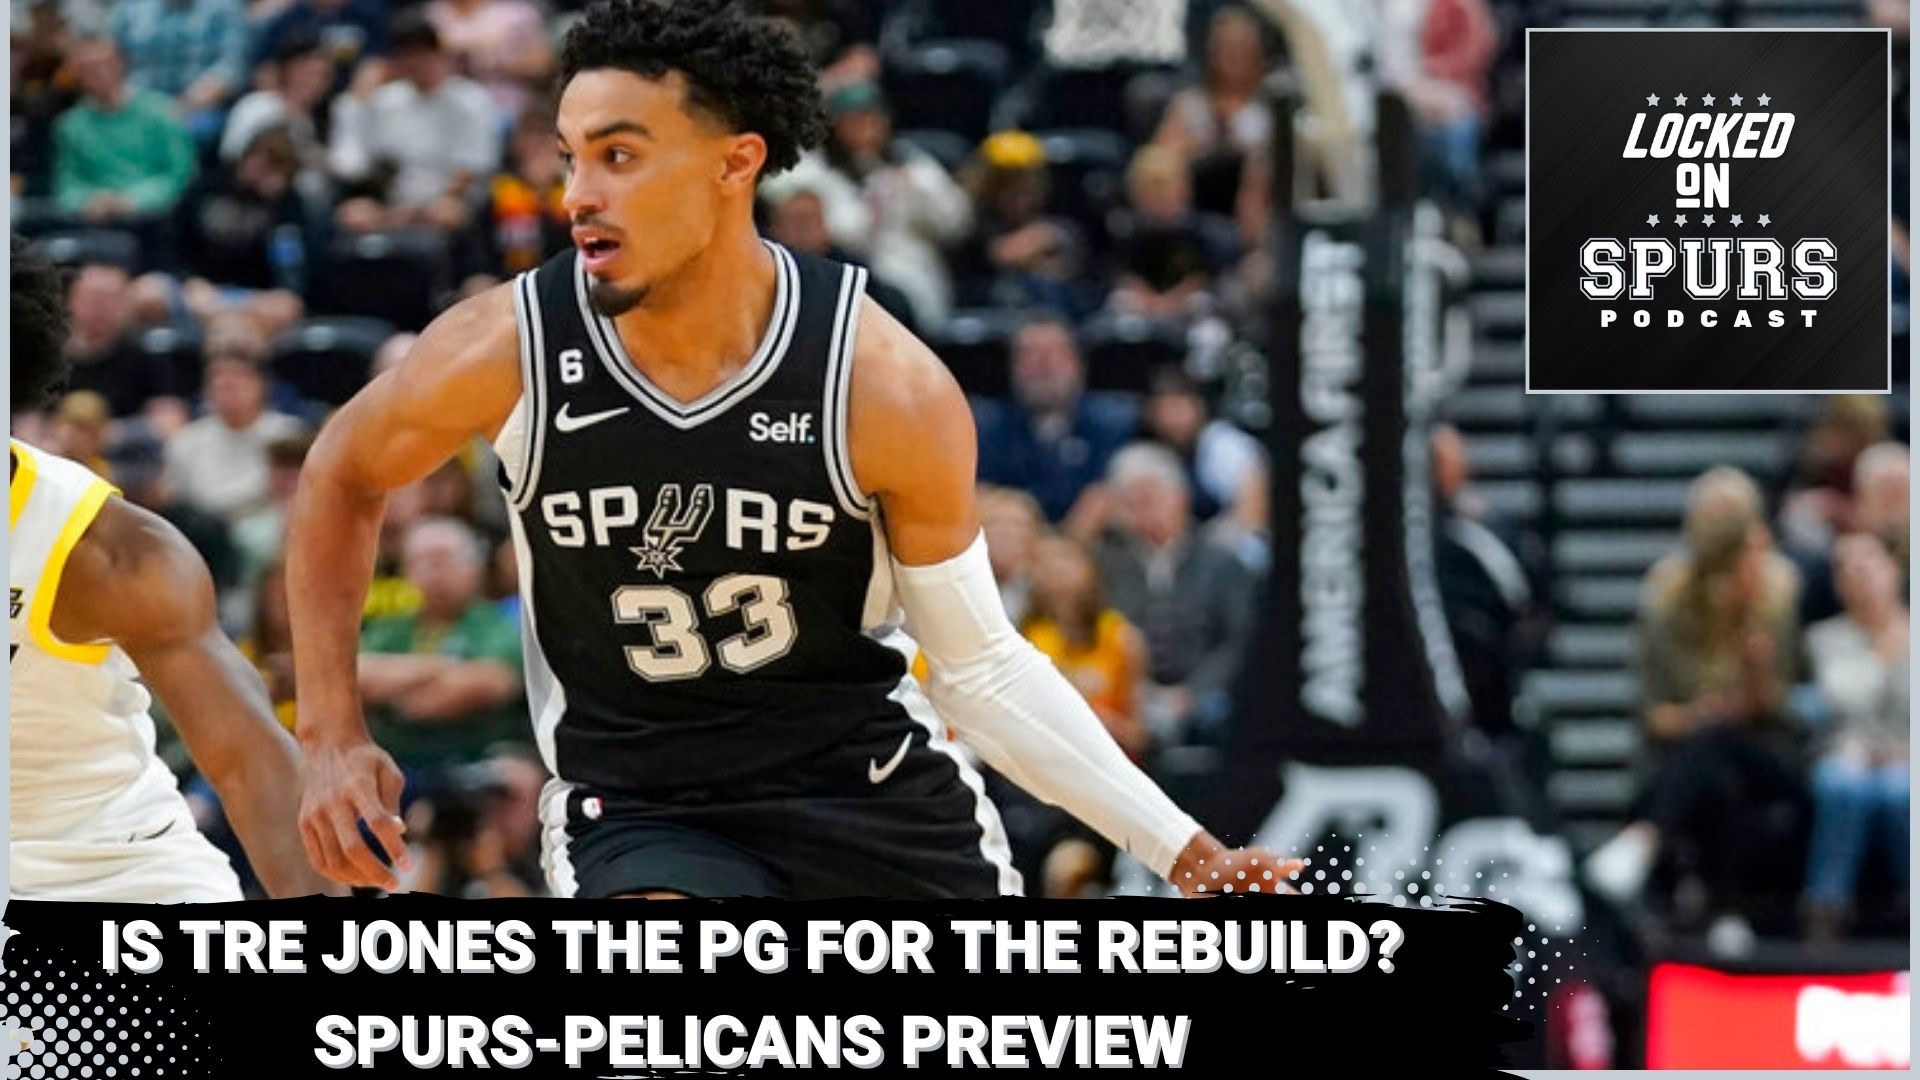 Can the Spurs beat the Pelicans on the road?